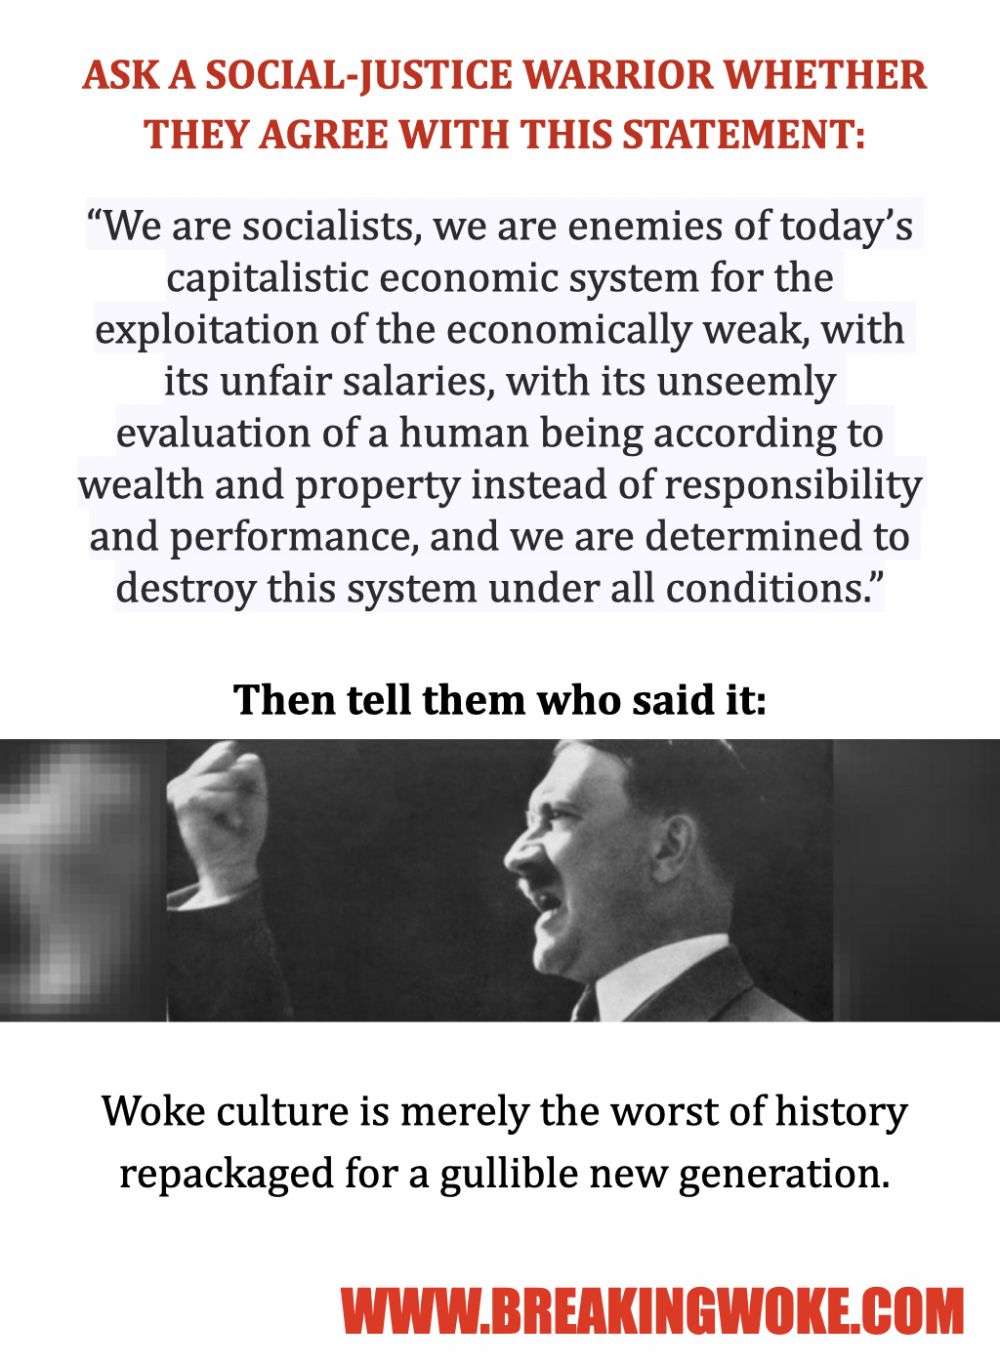 Are you woke enough for Adolf?